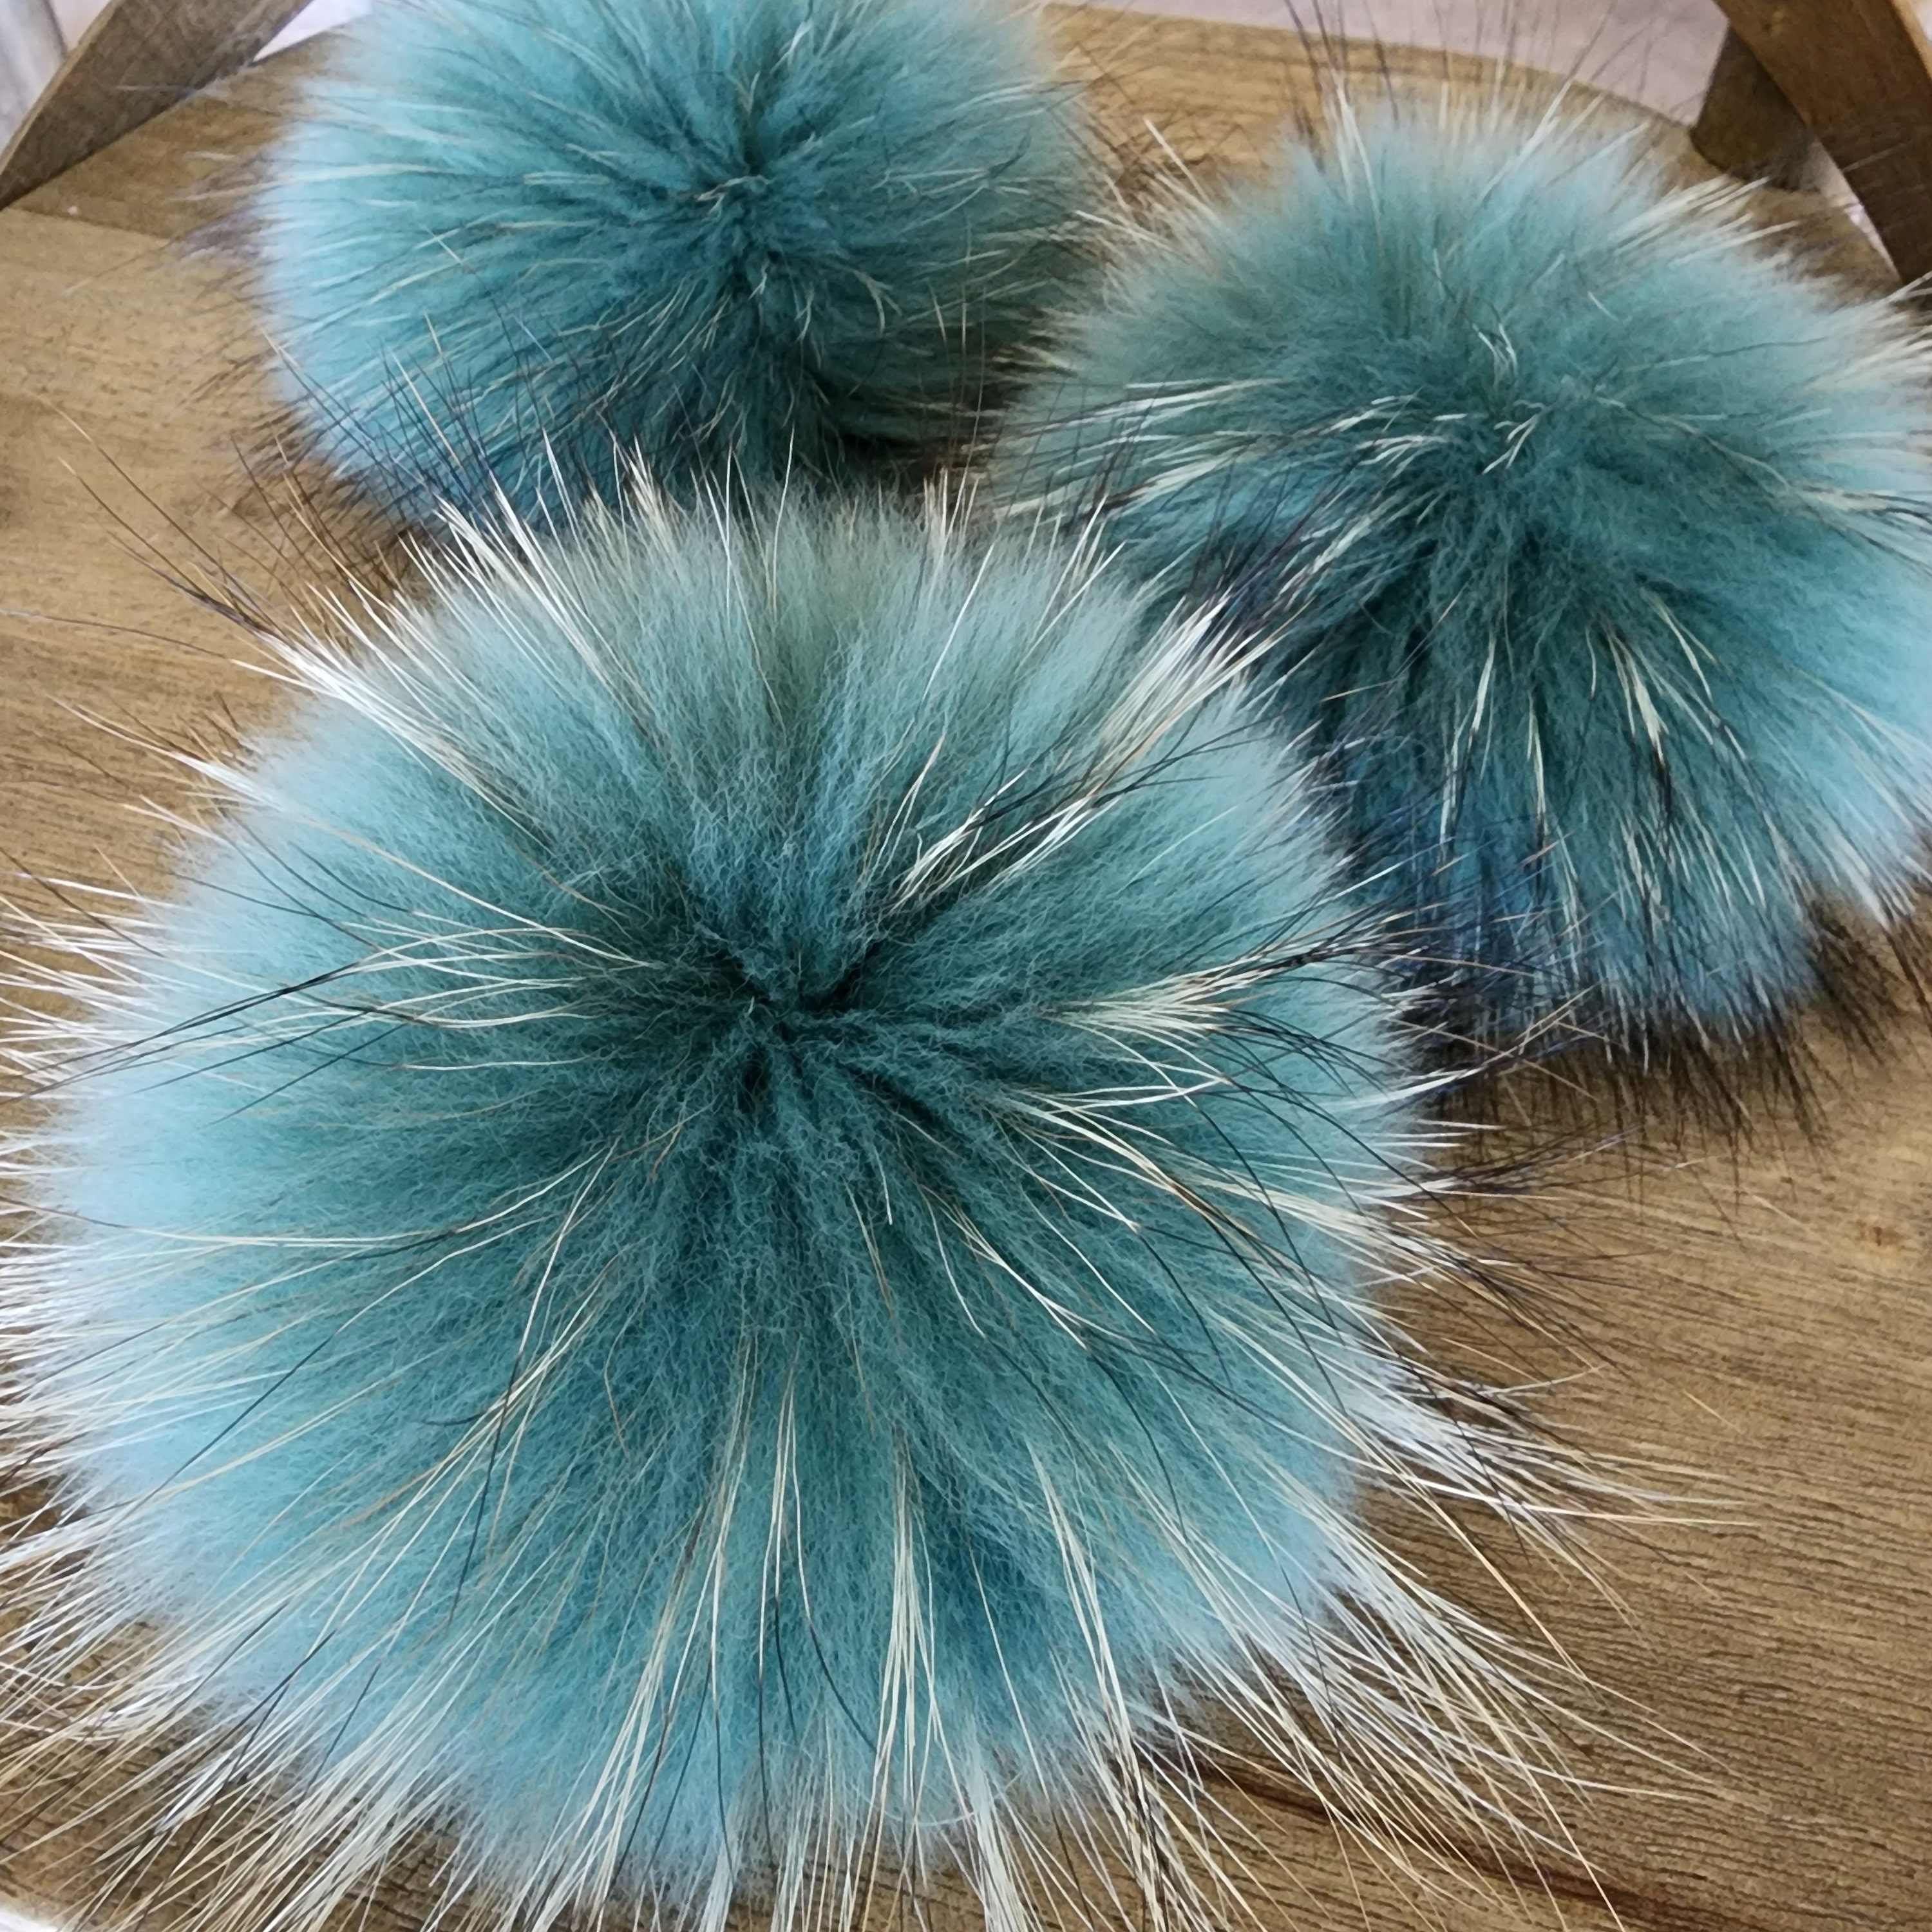 Pack of 6 Large 5inch Snap-on Faux Raccoon Fur Pom Pom Ball for Hat  Detachable